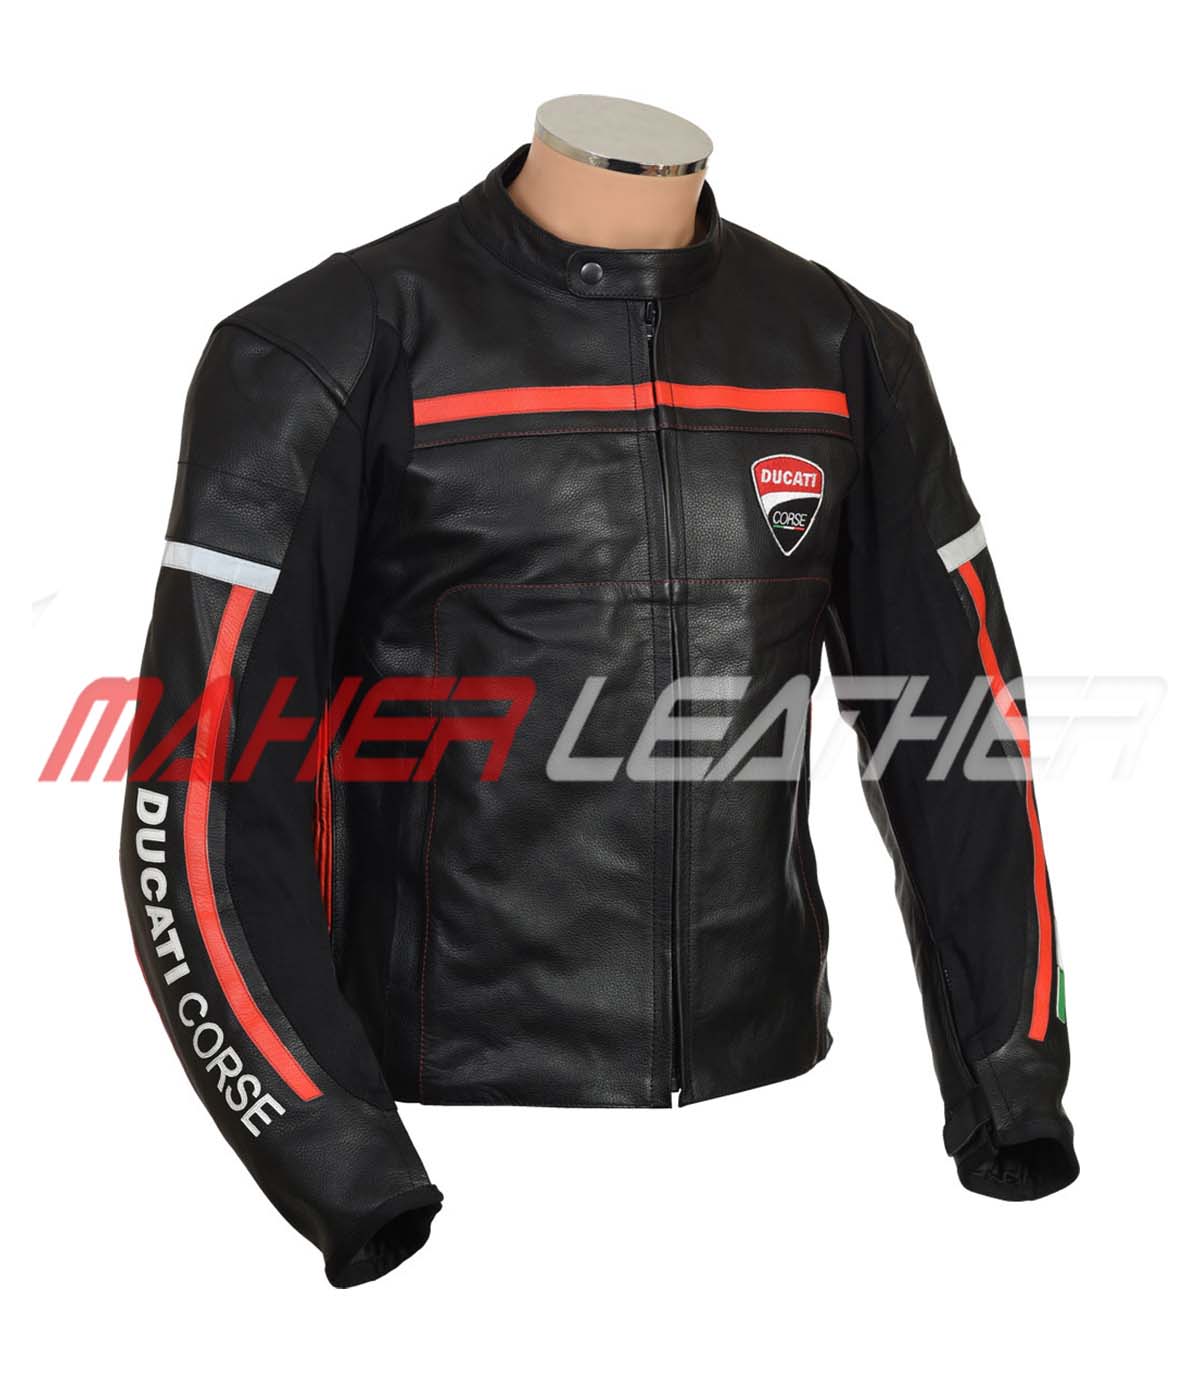 The right side look of The front look of Ducati motorcycle jackets for sale